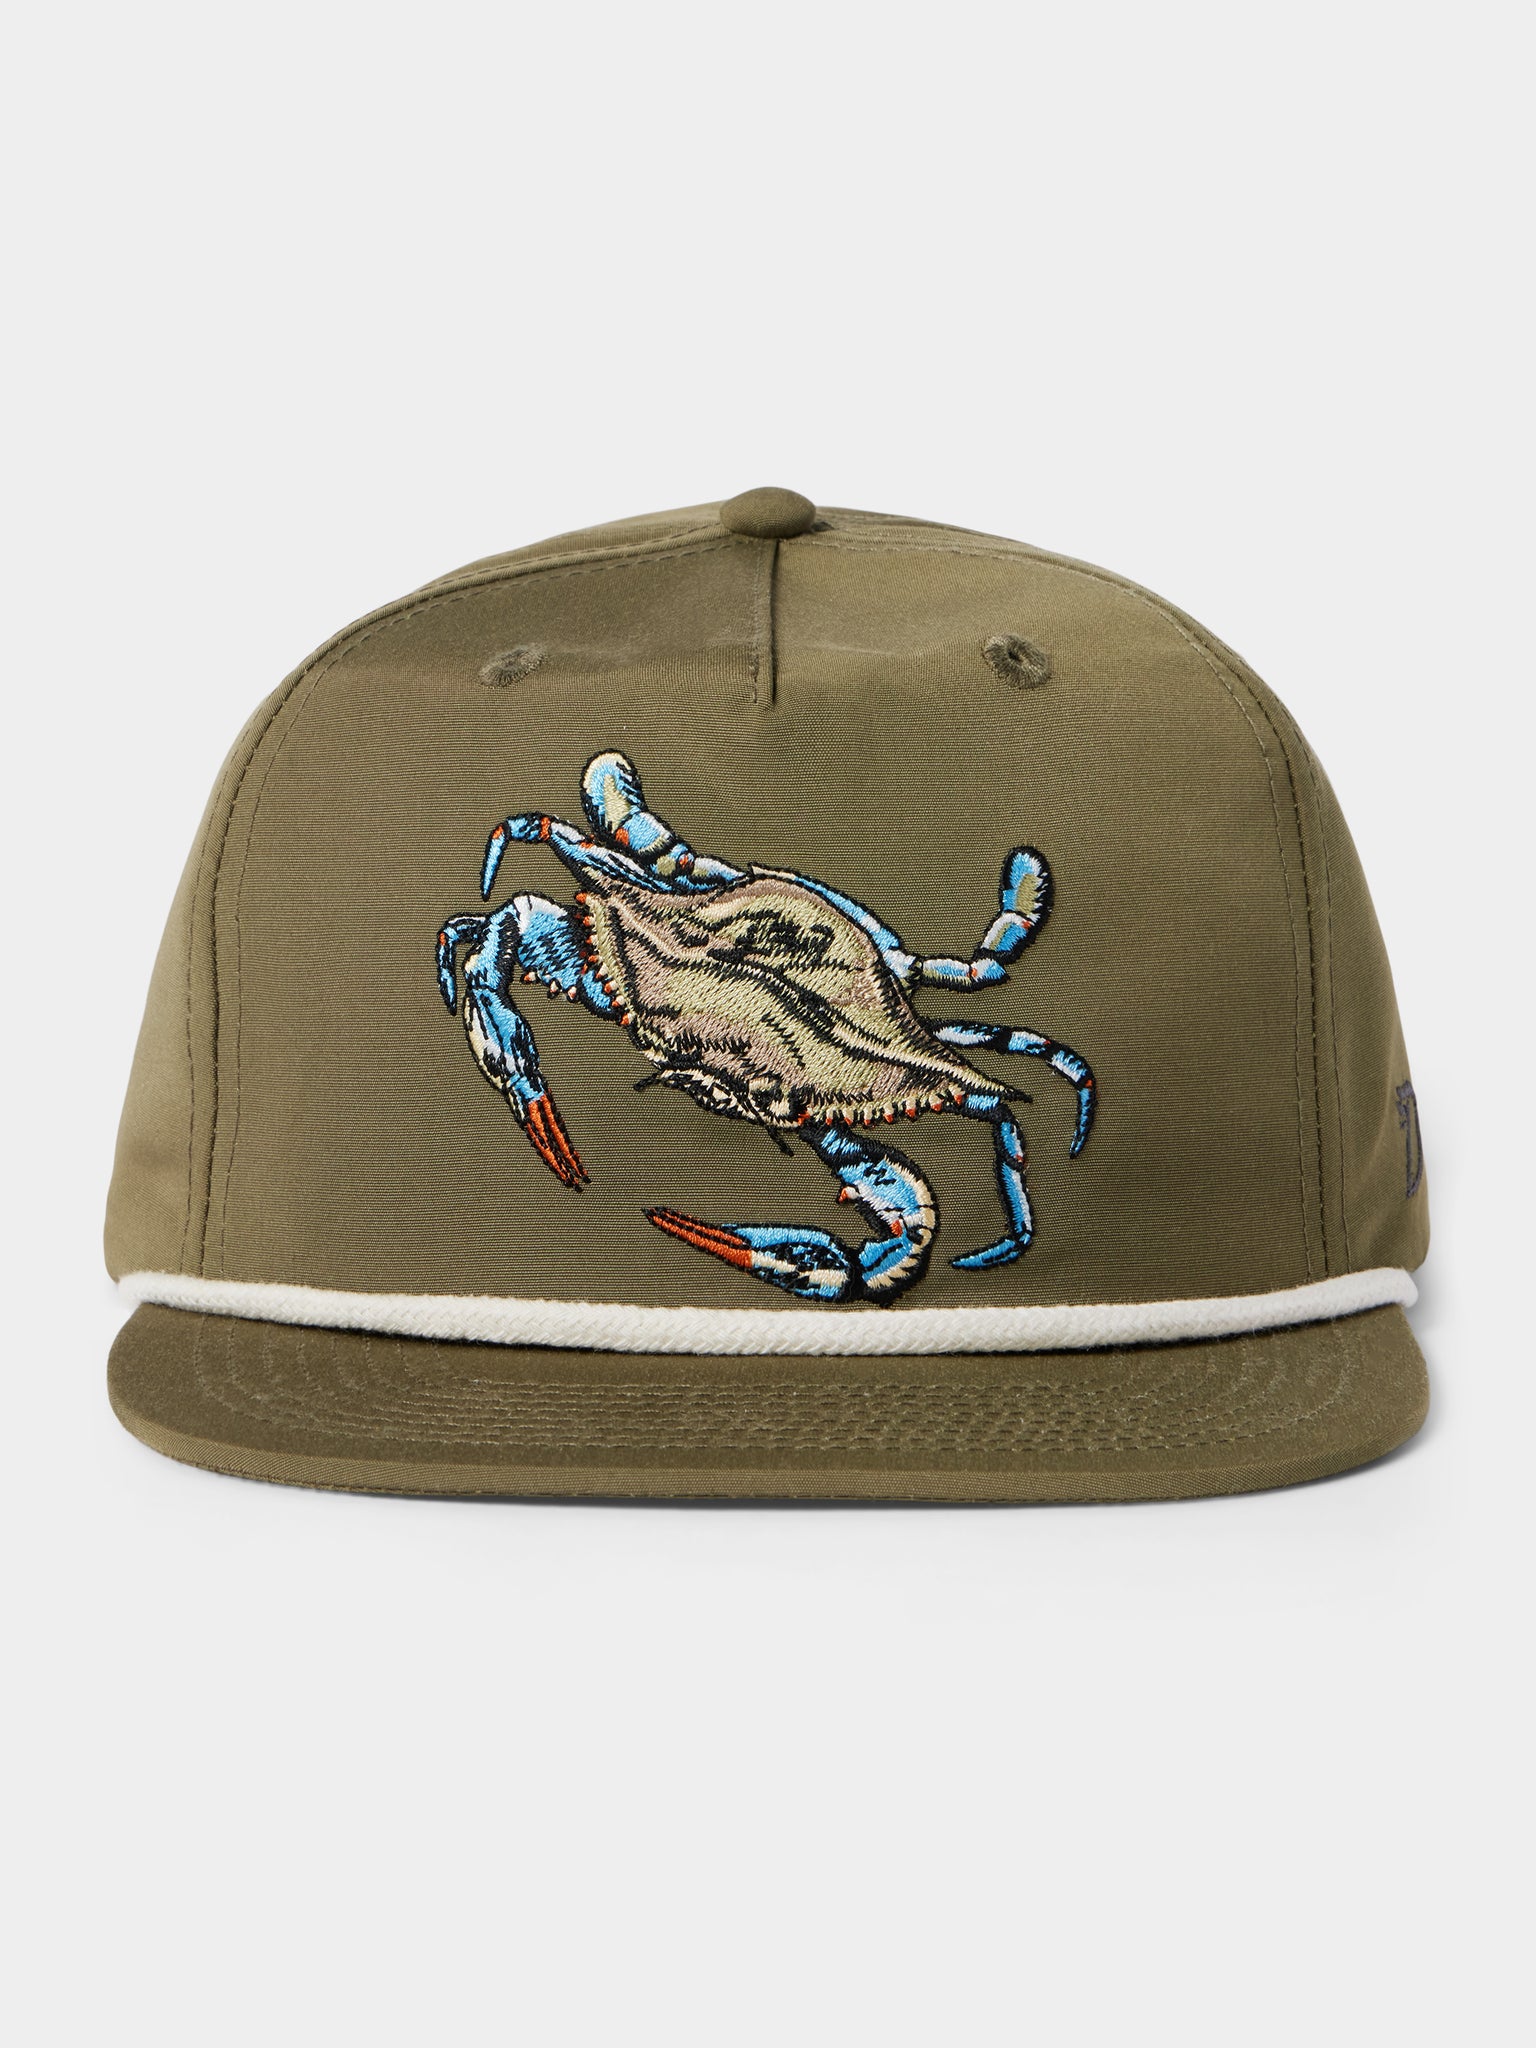 Blue Crab Hat - Dusty Olive